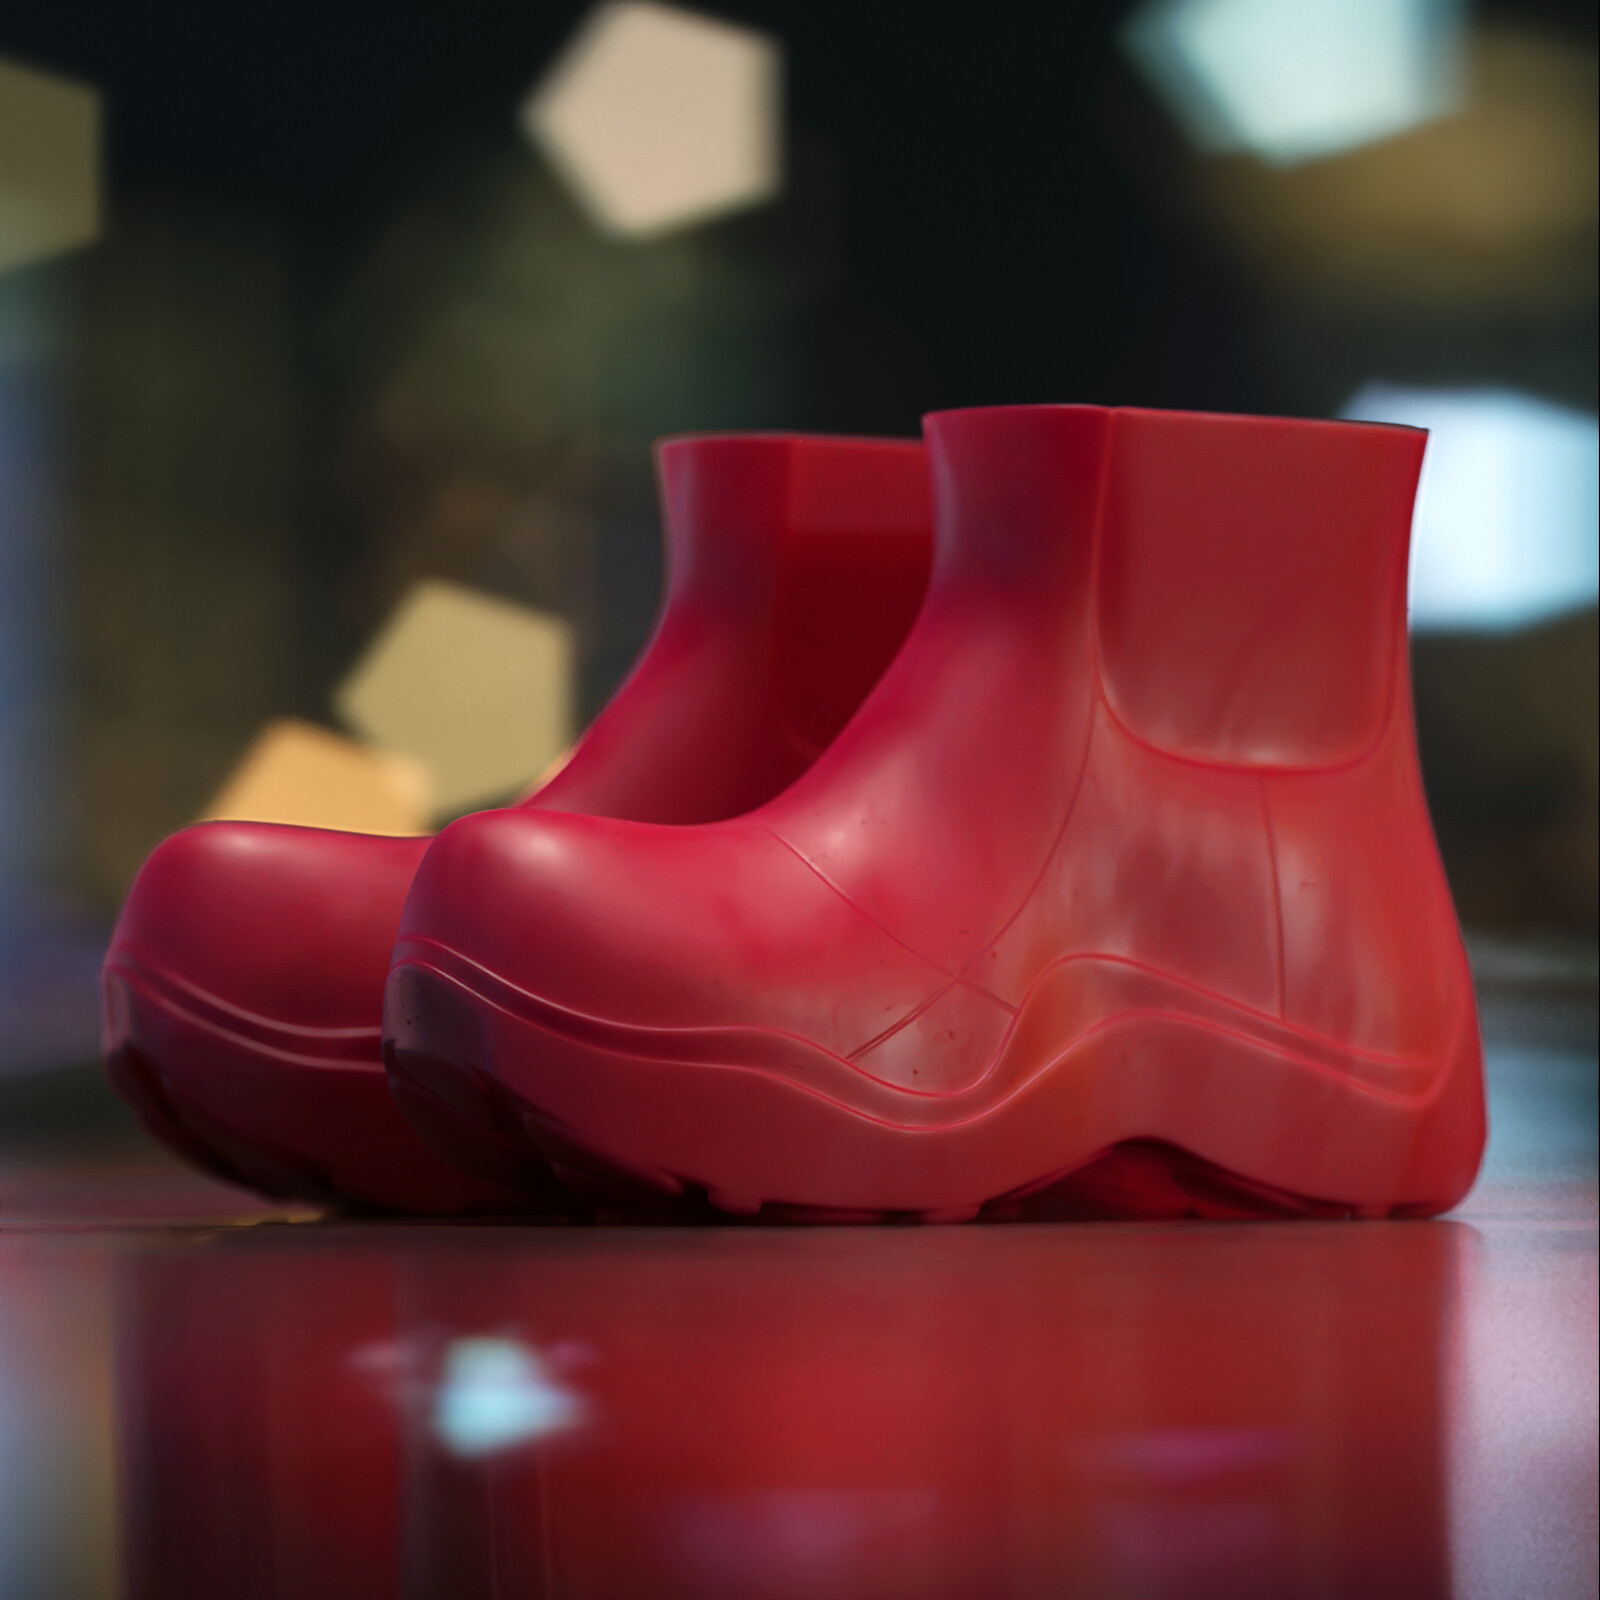 BV Puddle Boots - Finished Projects - Blender Artists Community